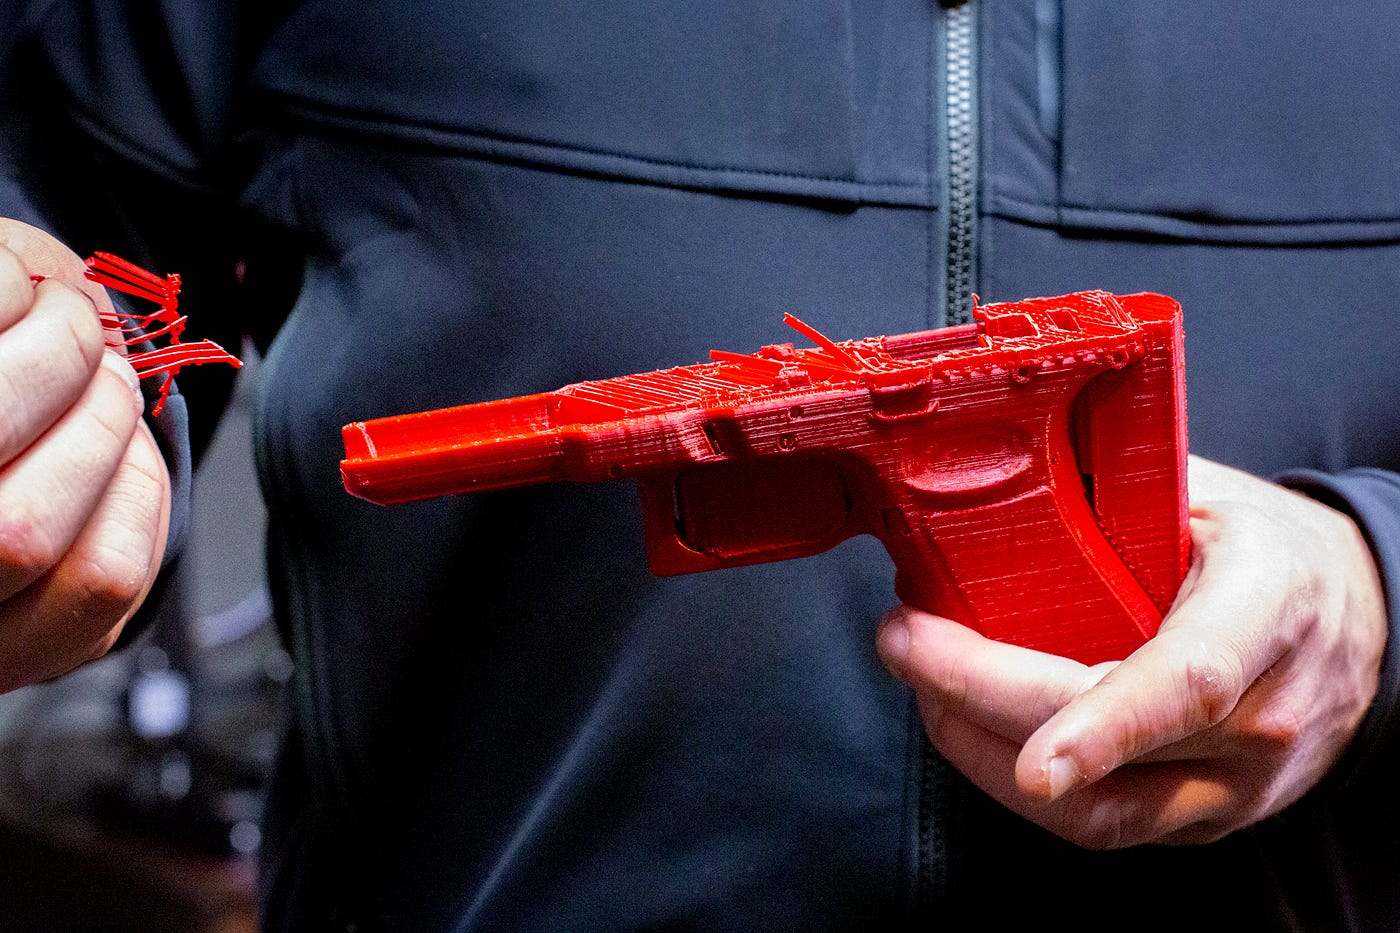 The 3D-Printed Gun Isn't Coming. It's Already Here. | by Kim Kelly | GEN